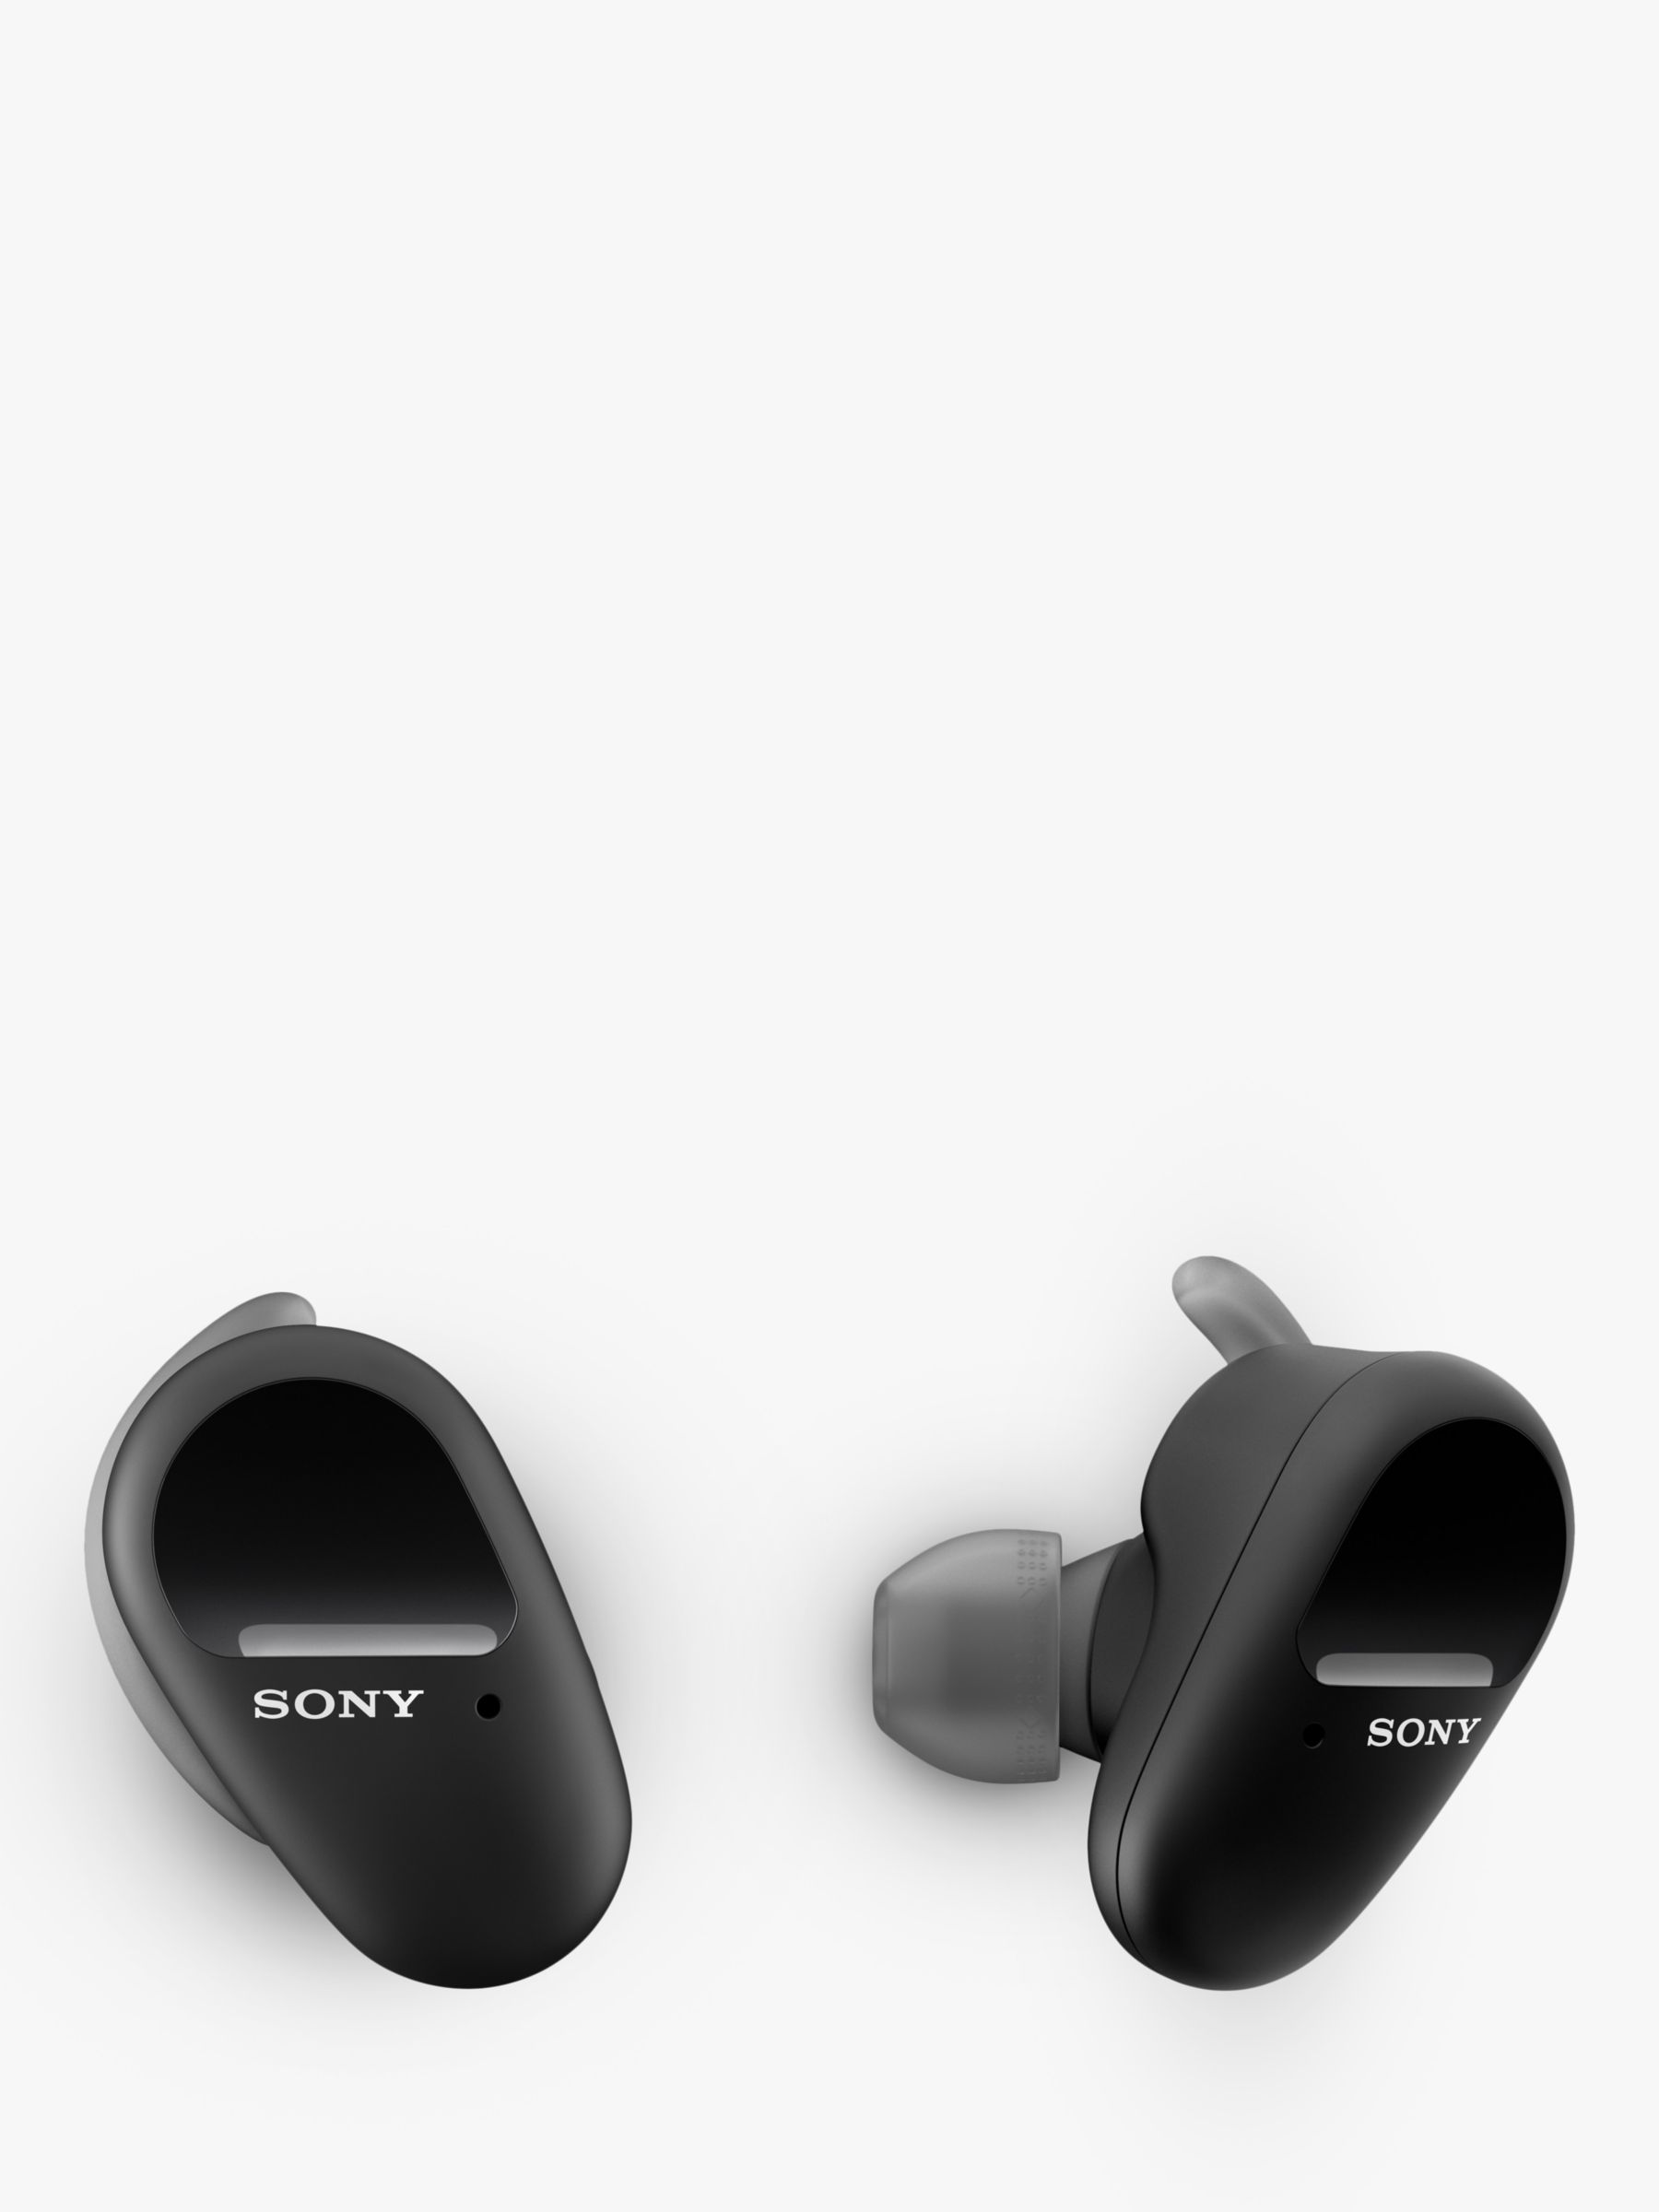 Sony WF-SP800N Noise Cancelling True Wireless Bluetooth Splash Resistant Sports In-Ear Headphones with Mic/Remote